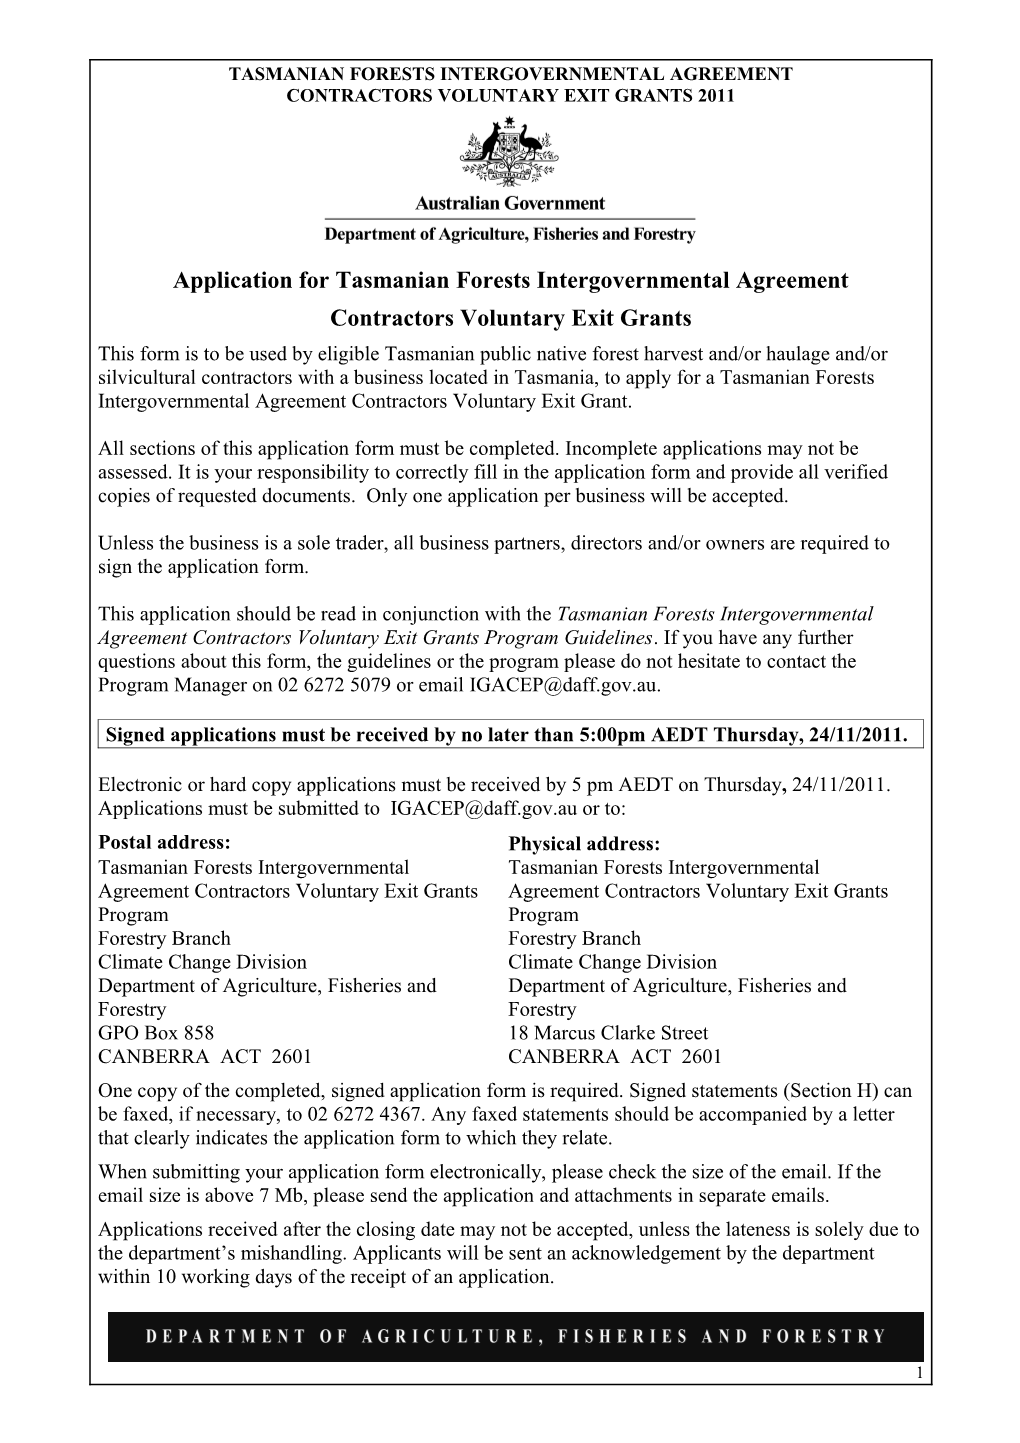 Application for Tasmanian Forests Intergovernmental Agreement